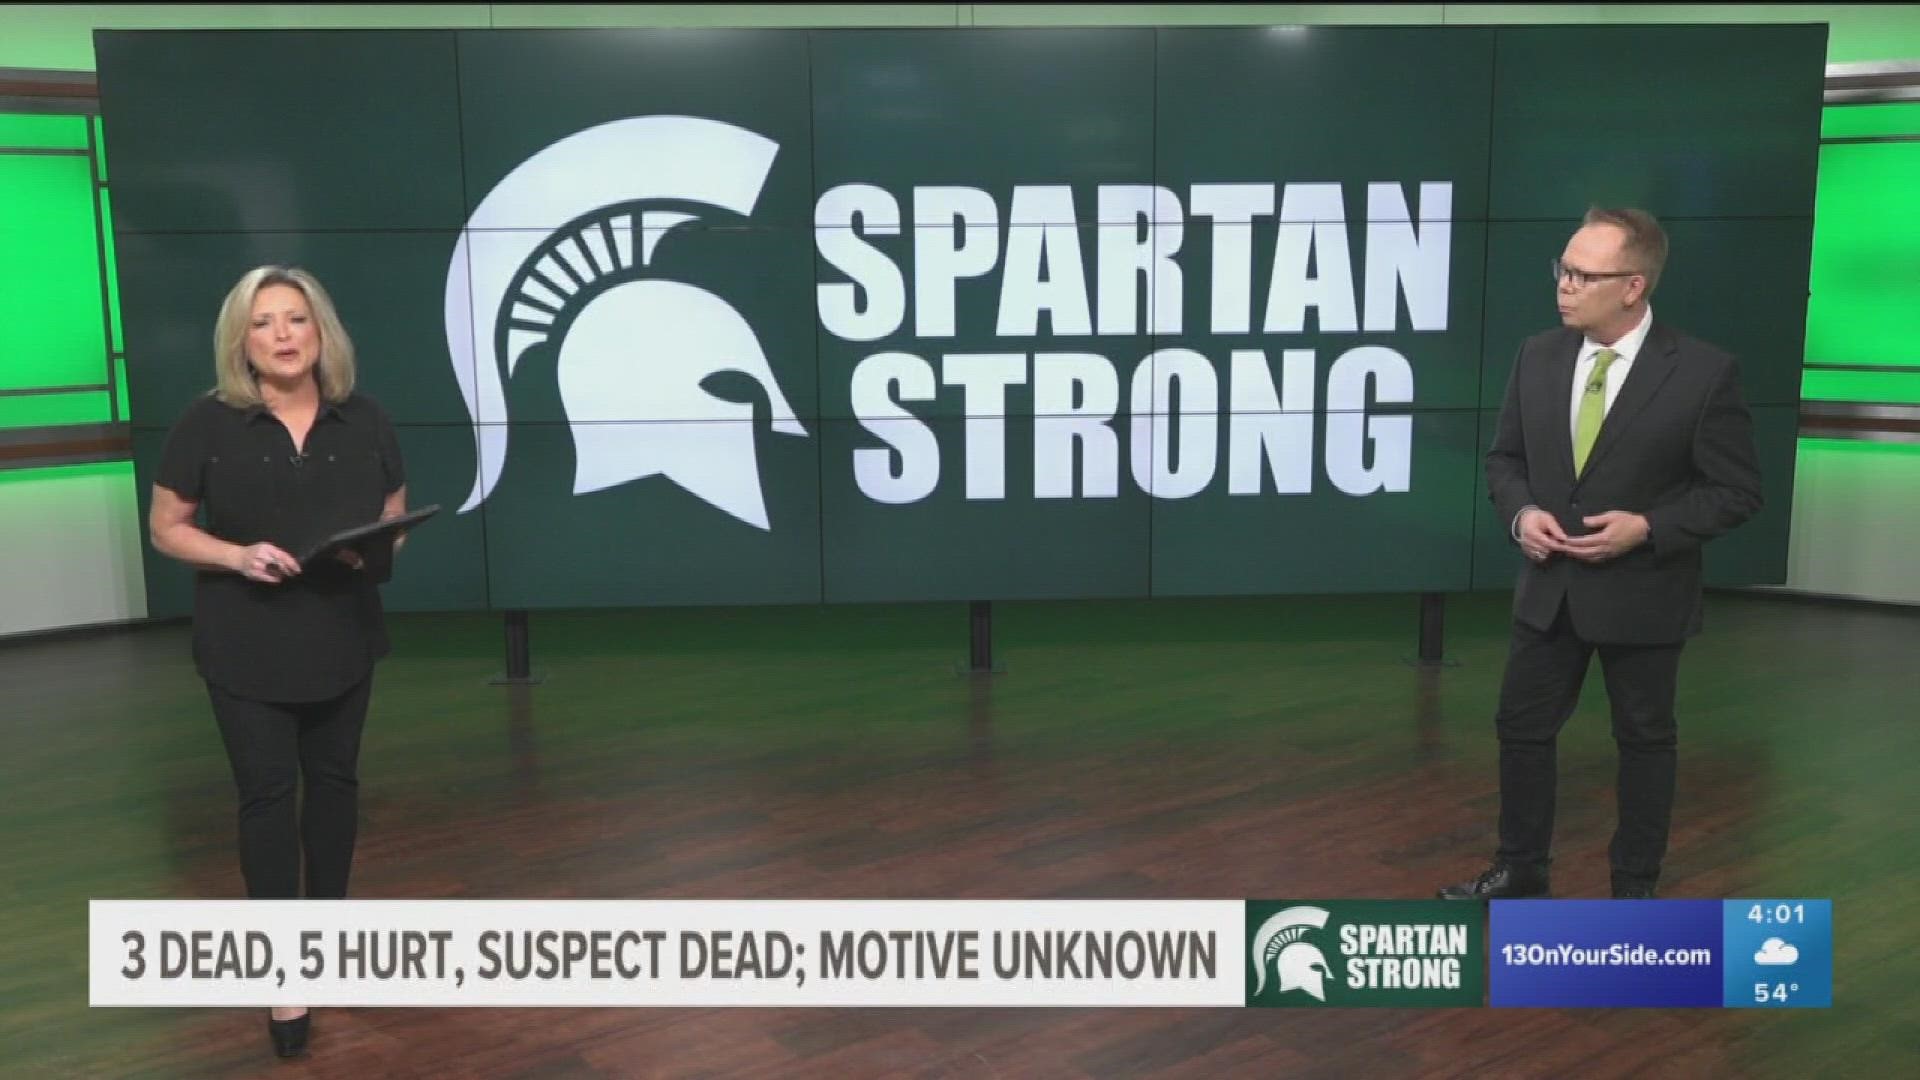 The threat to the Michigan State University campus is over after a gunman opened fire and killed three students Monday night before killing himself, police said.